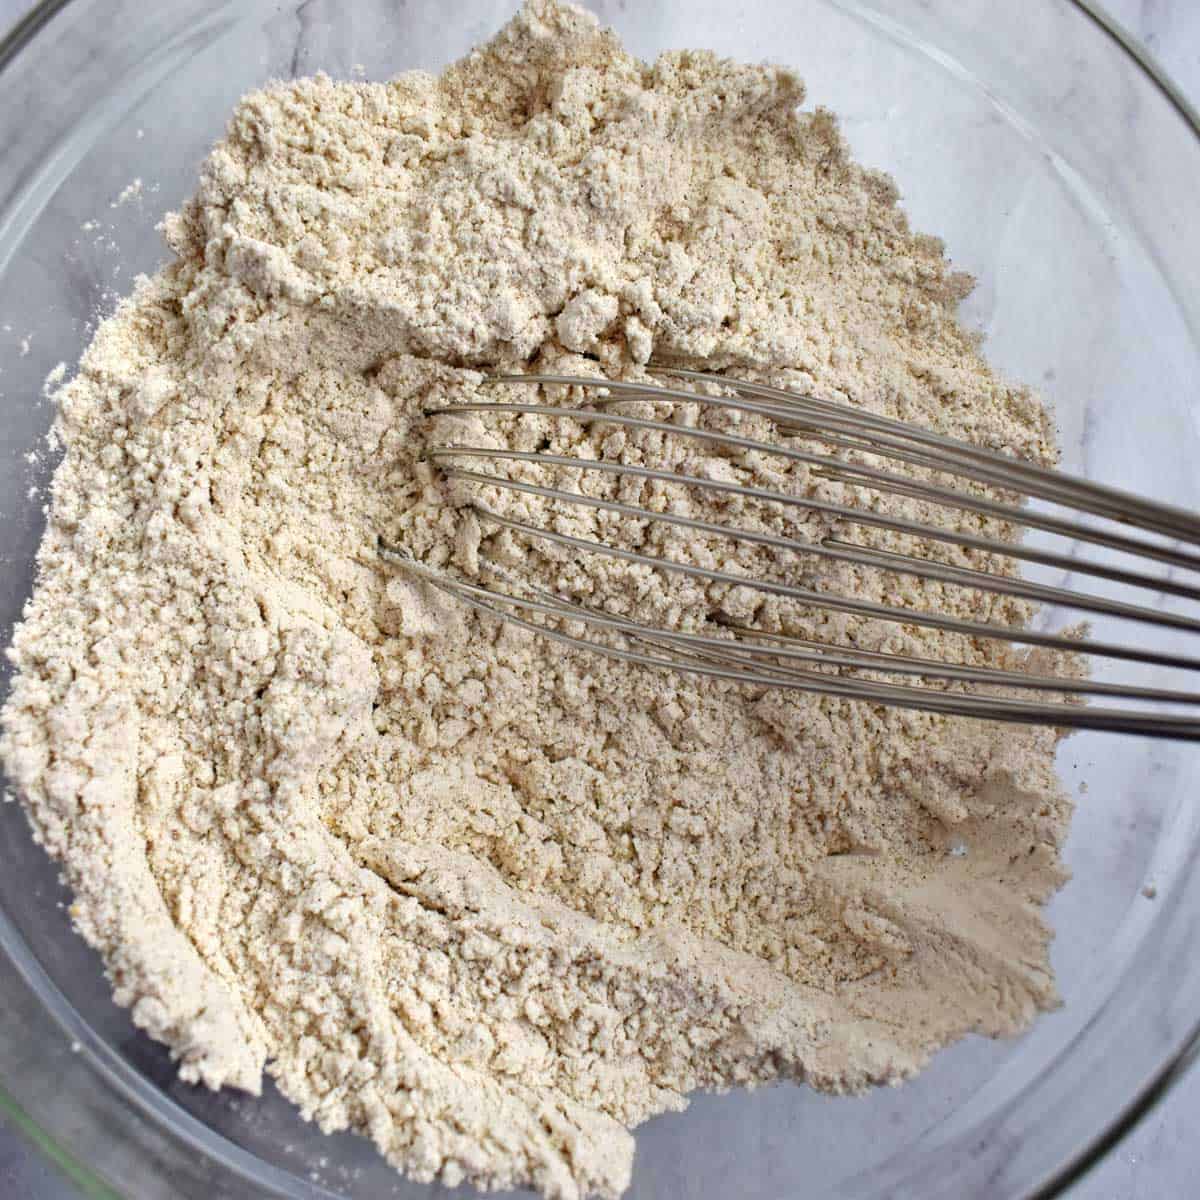 Dry ingredients for gluten free ginger snaps whisked together with a wire whisk in a glass mixing bowl.